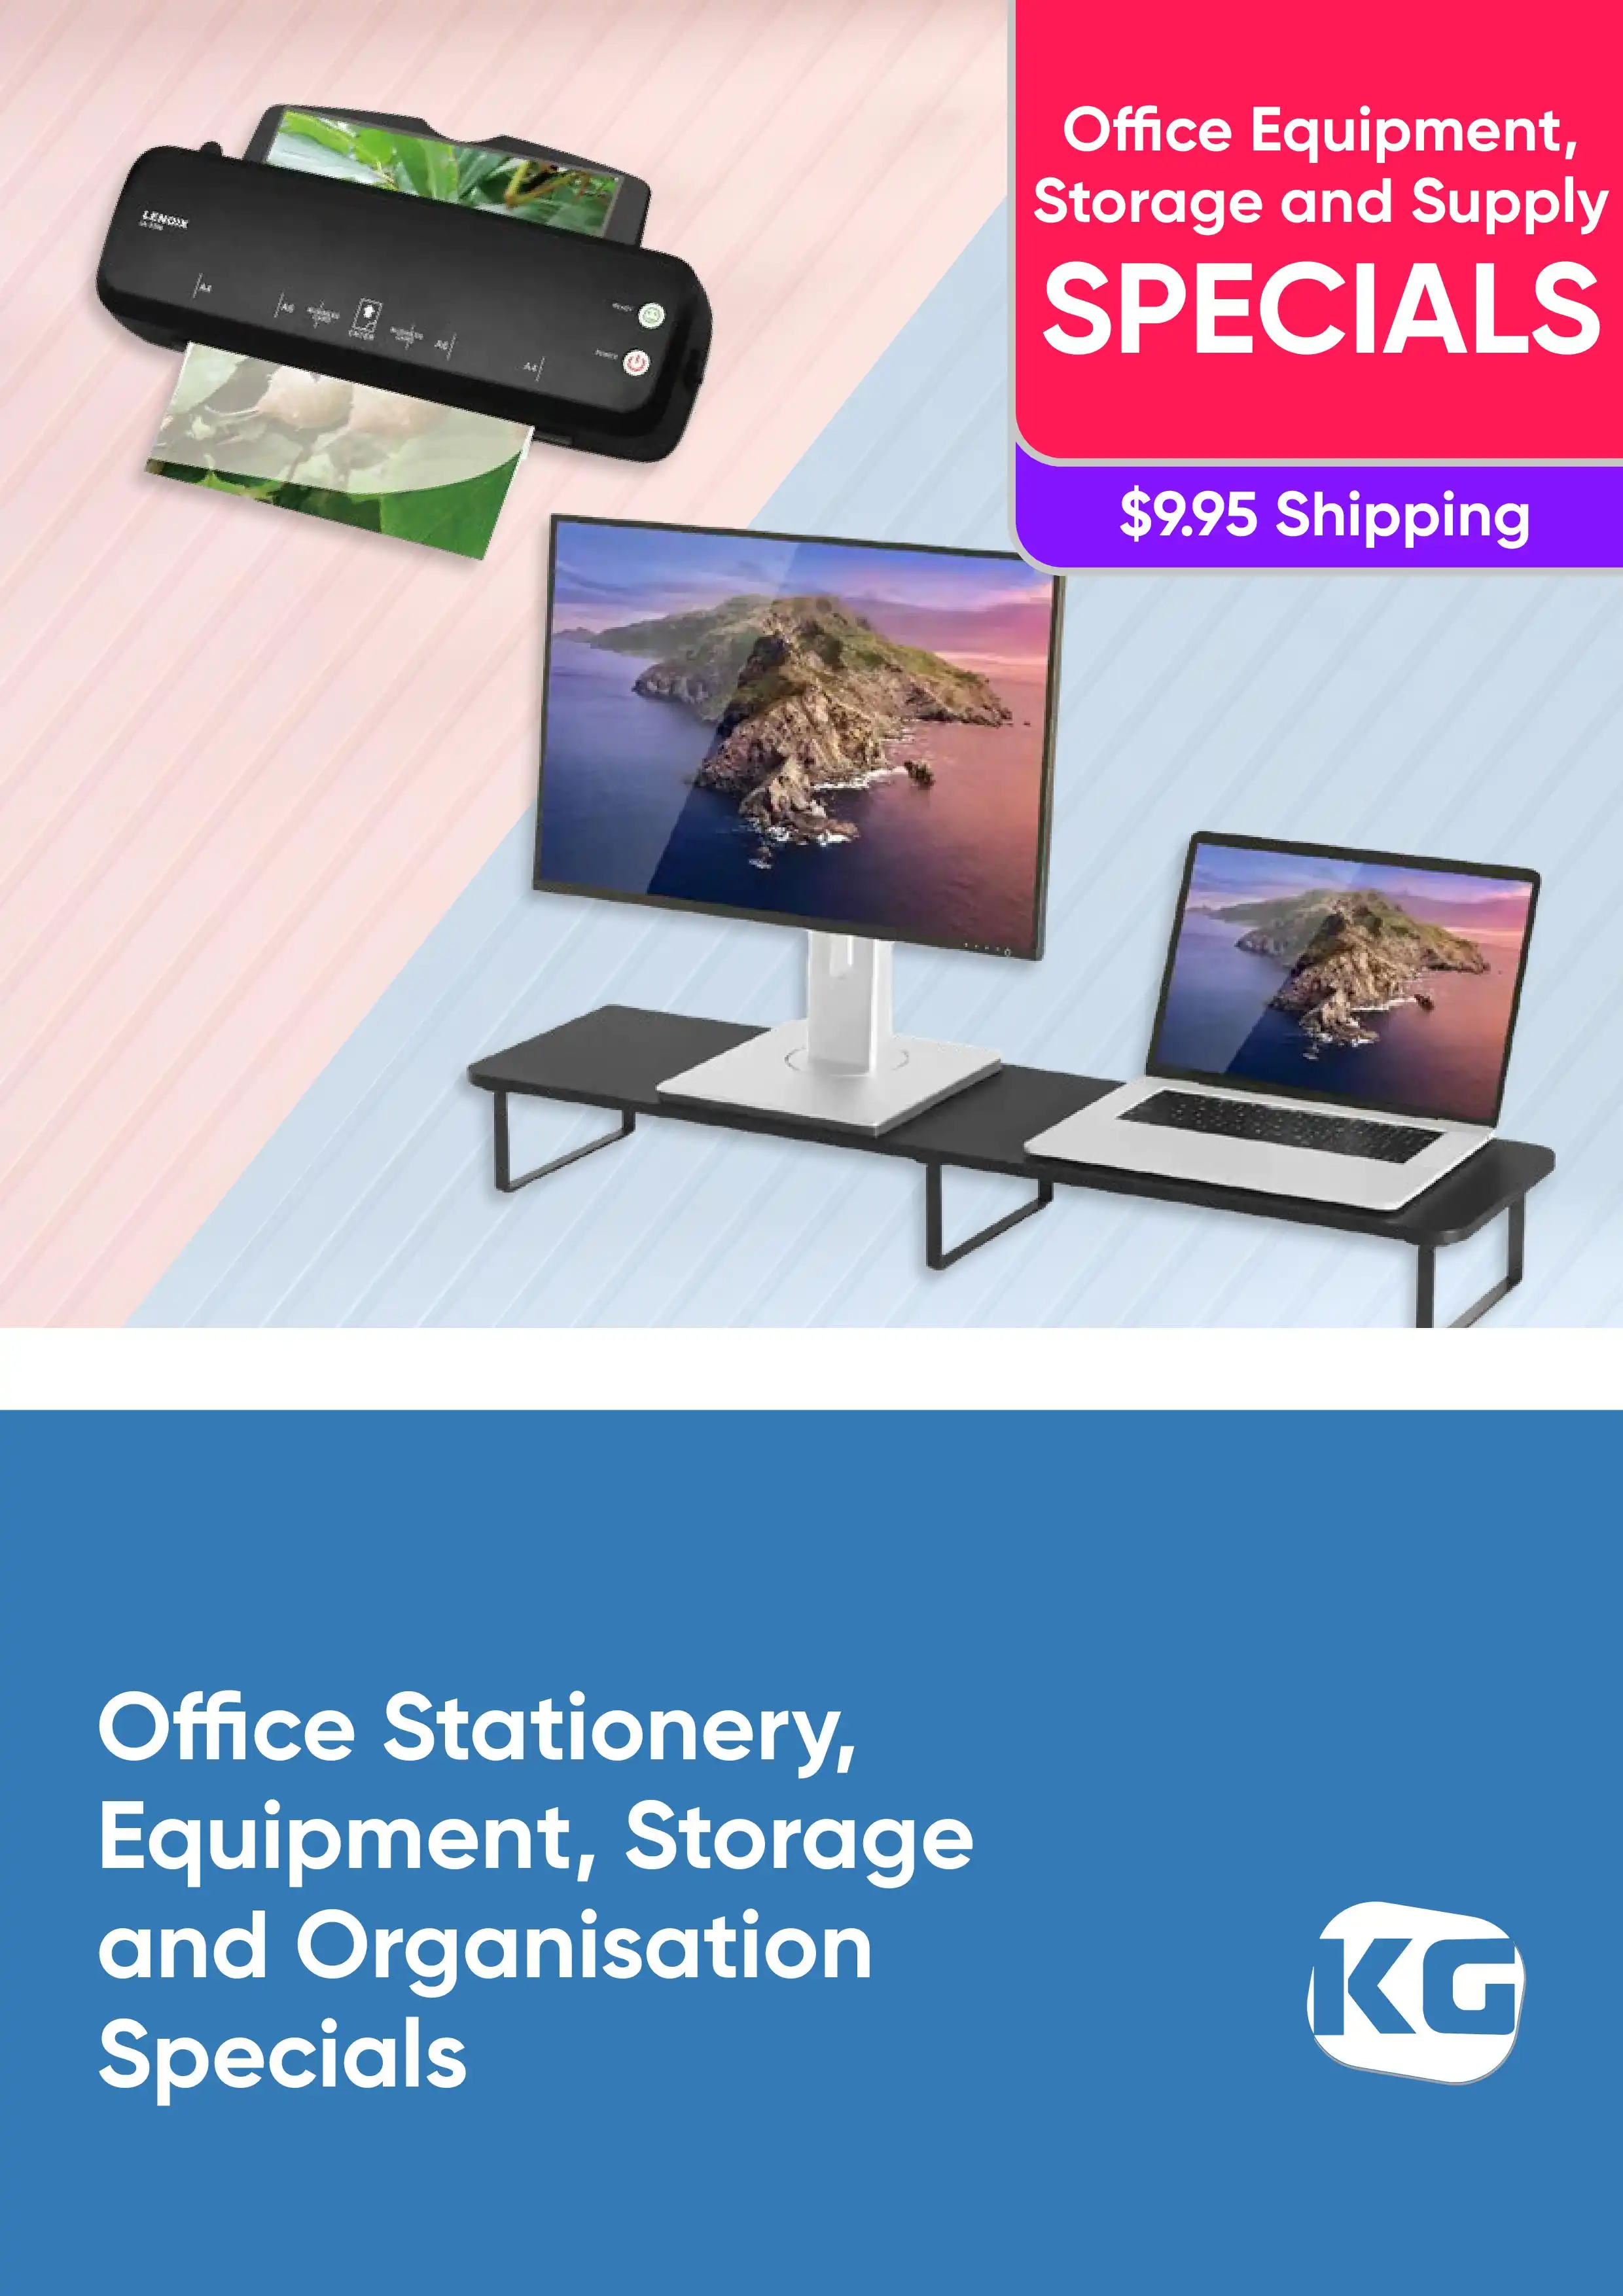 Office Stationery, Equipment, Storage and Organisation Specials